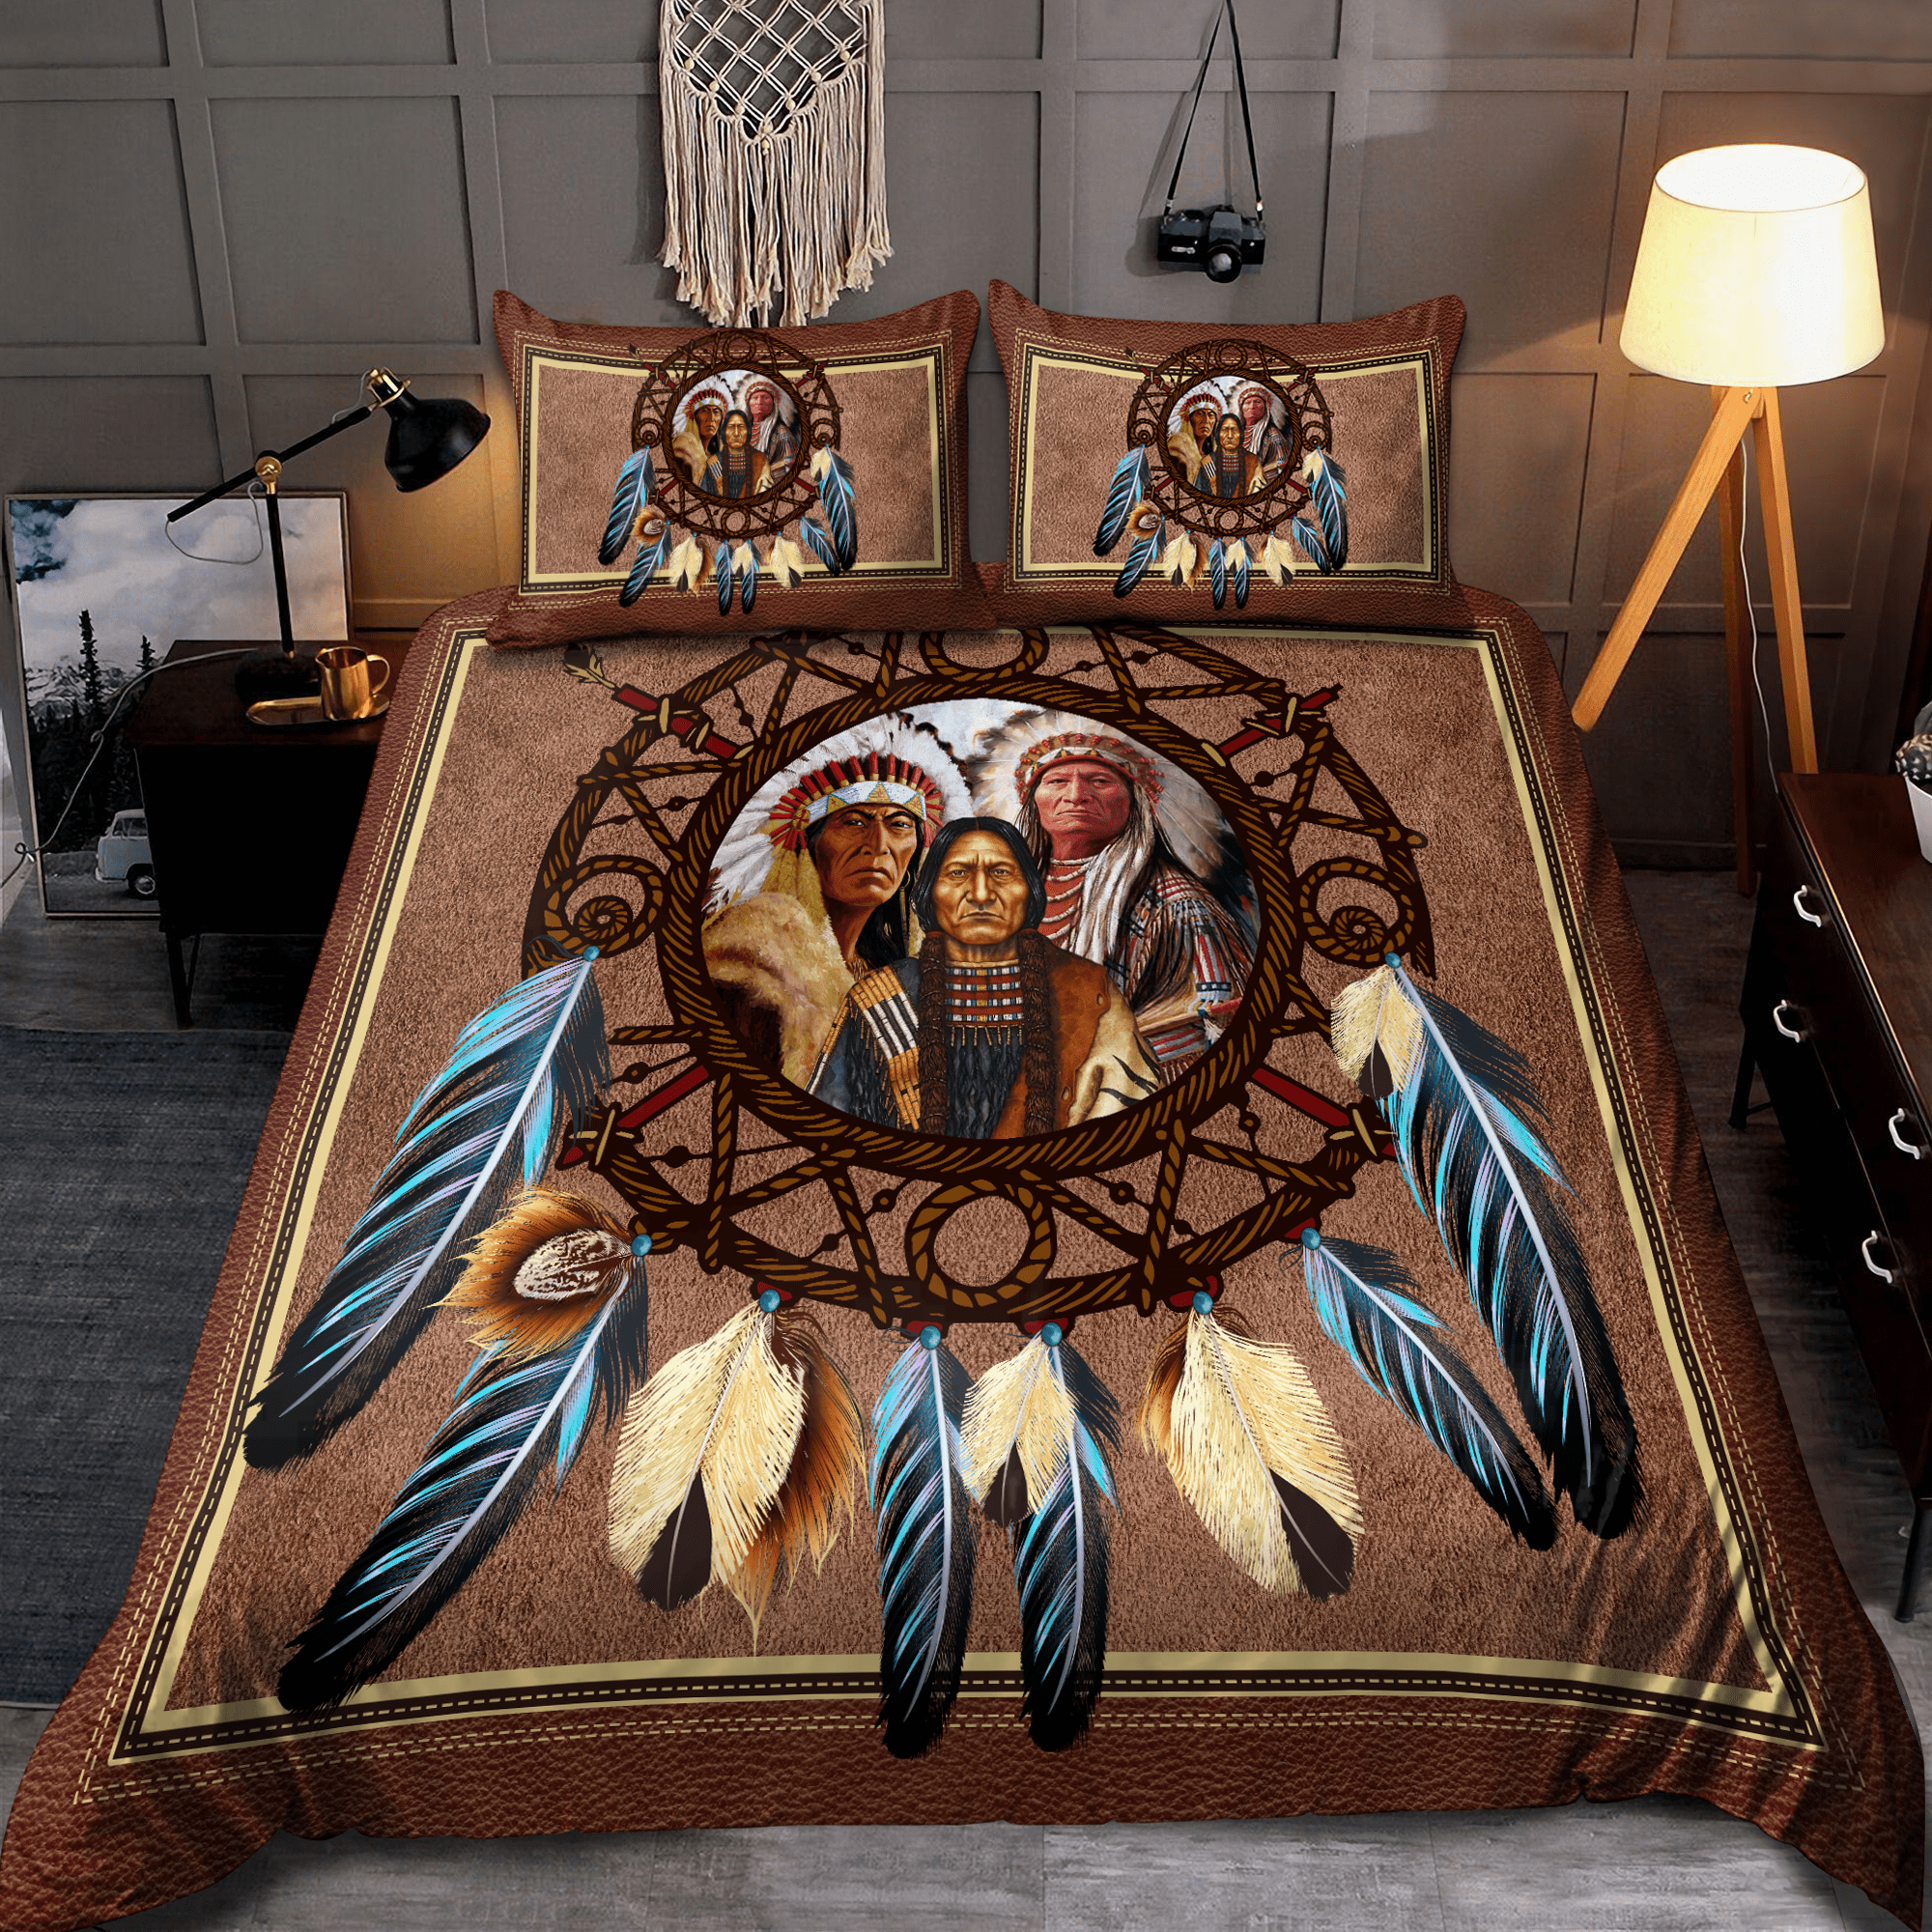 native-american-3d-all-over-printed-bedding-set